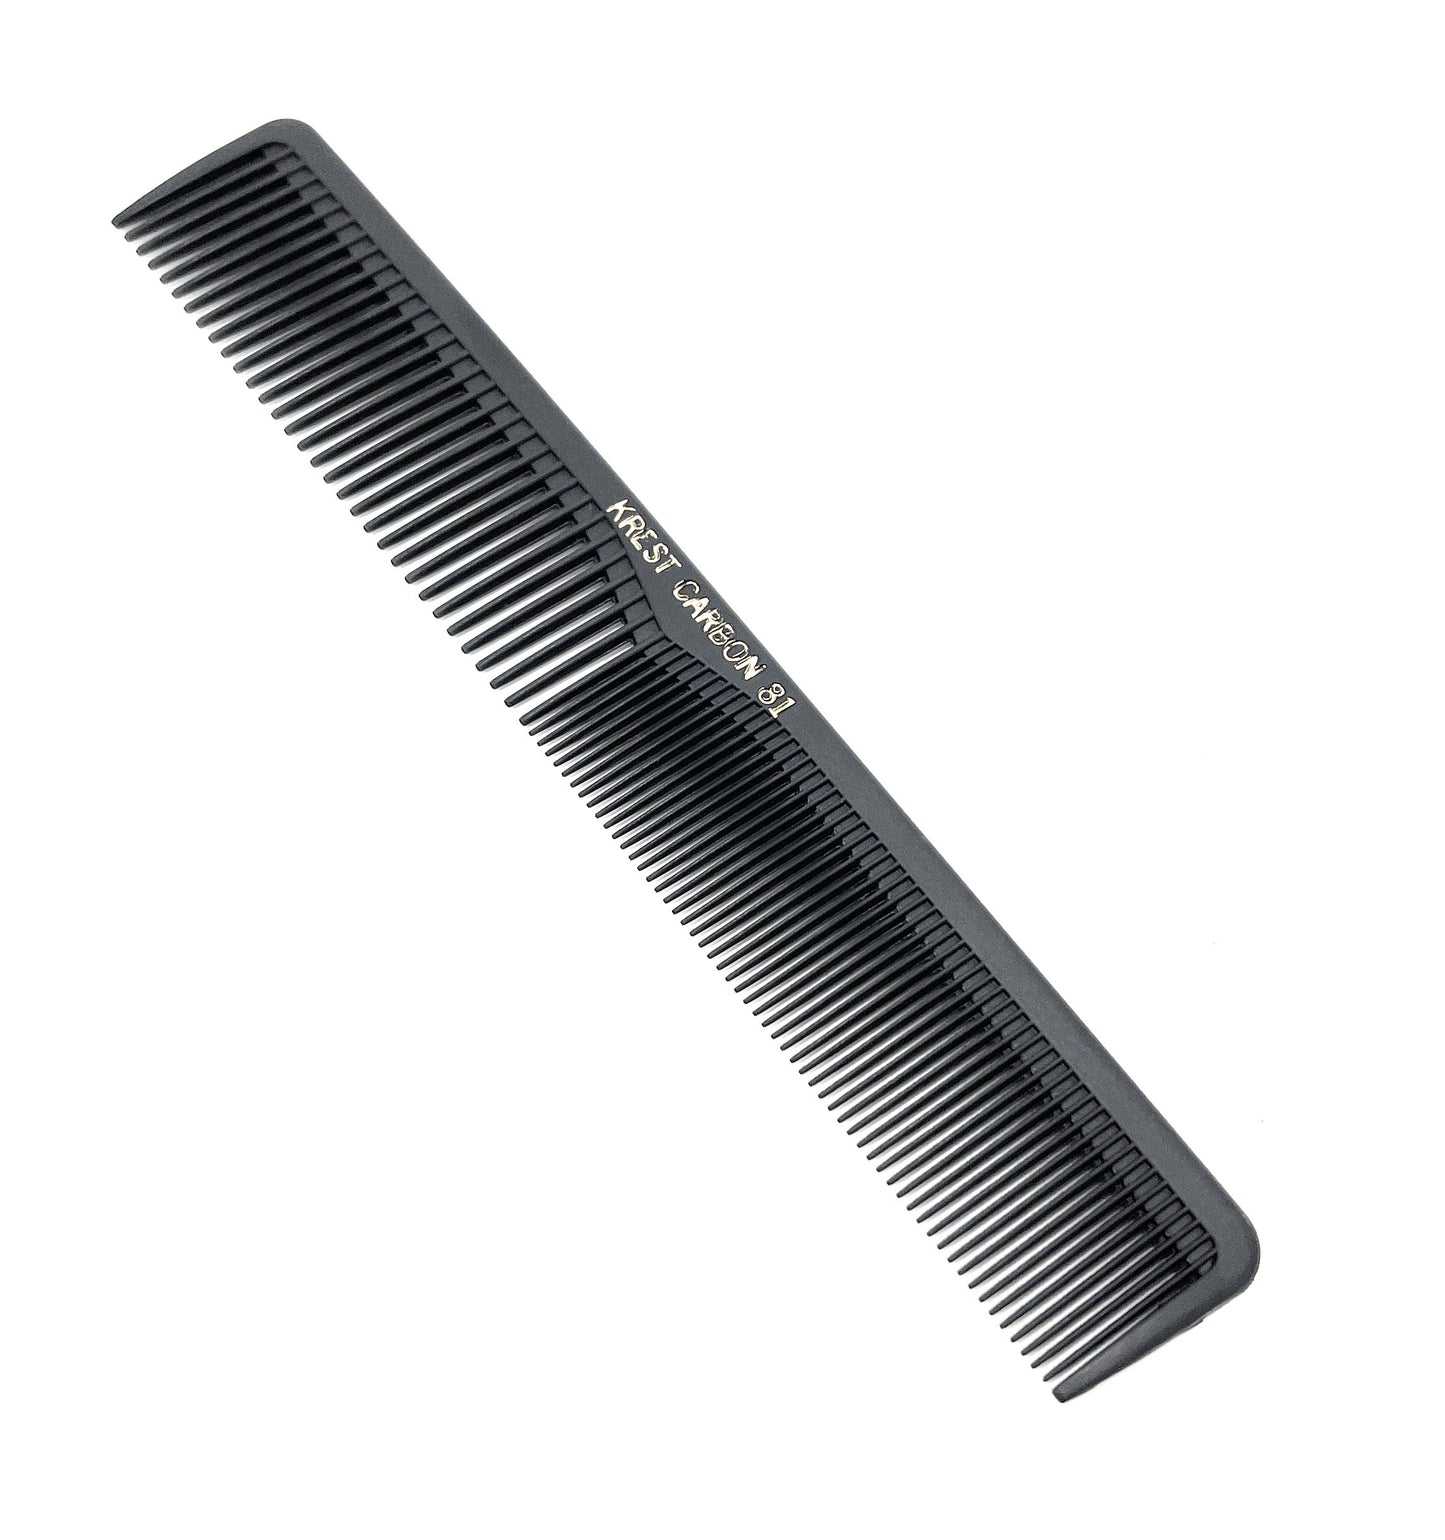 Krest Carbon Fiber Heat Thermal Combs All Purpose Barber Cutting Parting Rattail Flexible Thing Sectioning Fine And Wide Tooth 1 Pc.